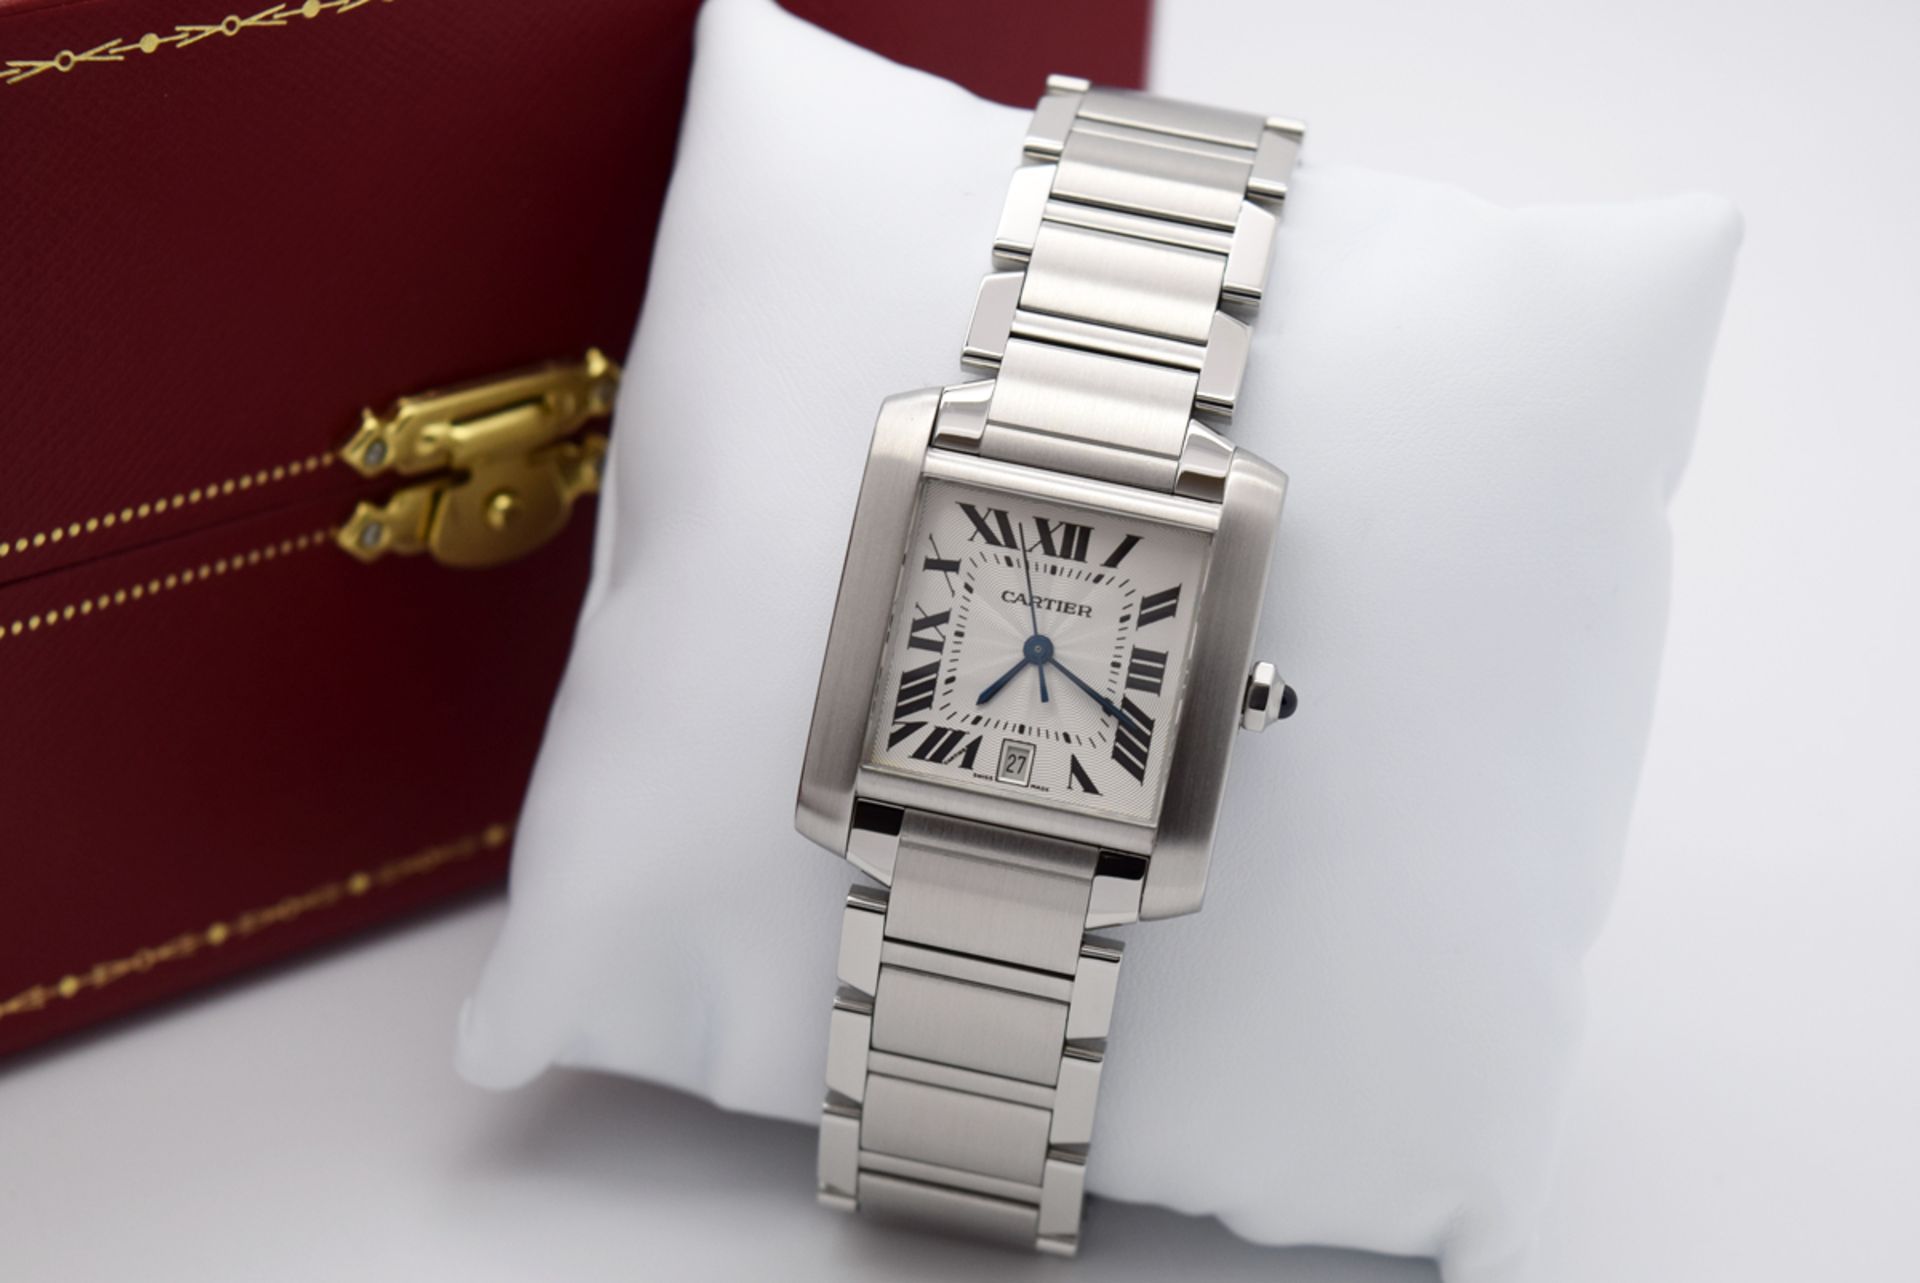 Cartier Tank (Mens Model) - 2302 / W51002Q3 - Stainless Steel - Roman Numeral Dial - Image 2 of 12